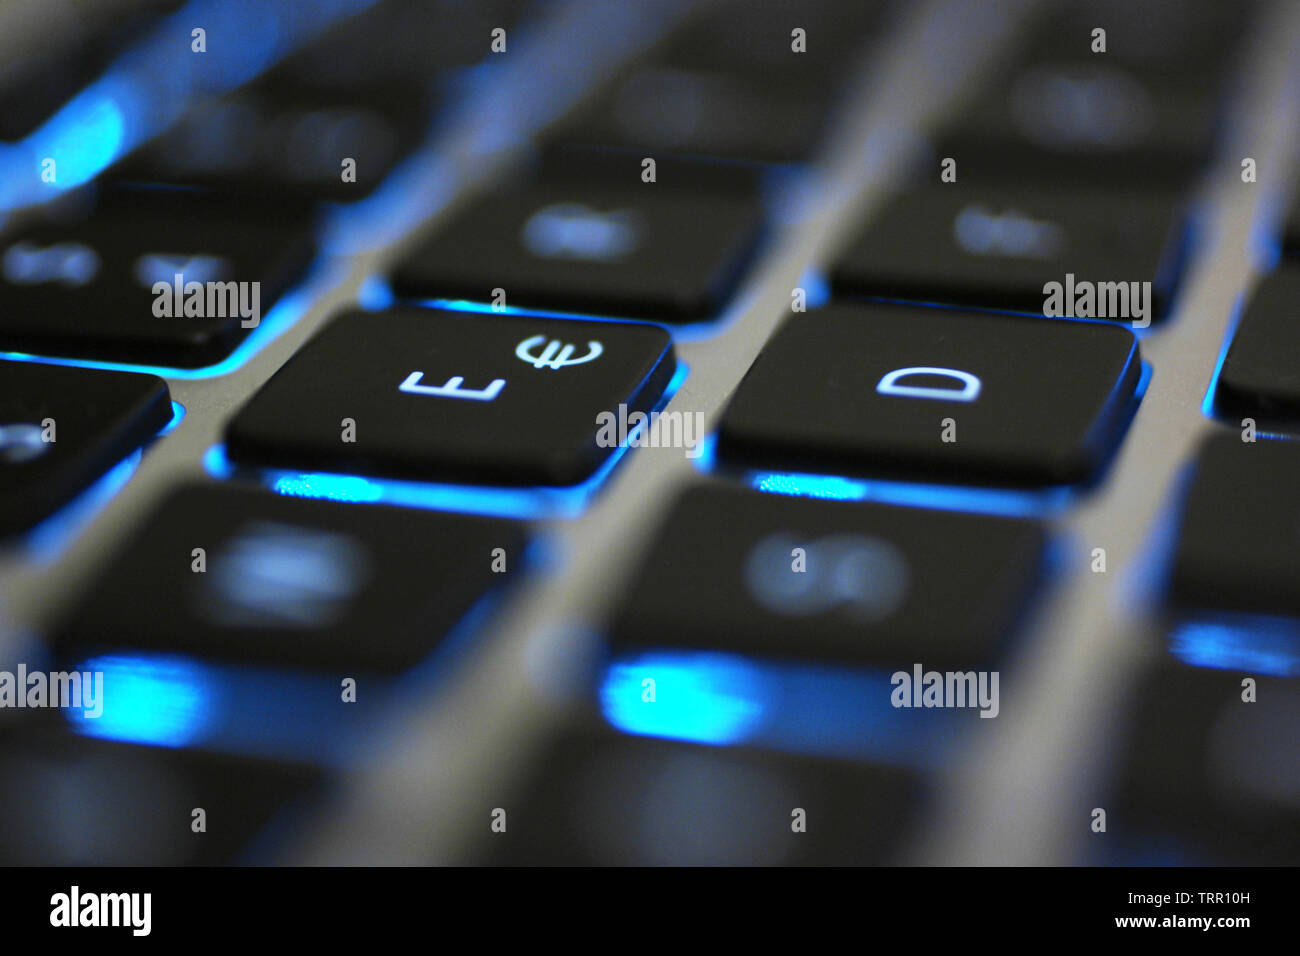 Laptop keyboard with blue backlight. Buttons closeup showing black details, white letters and silver body. Stock Photo